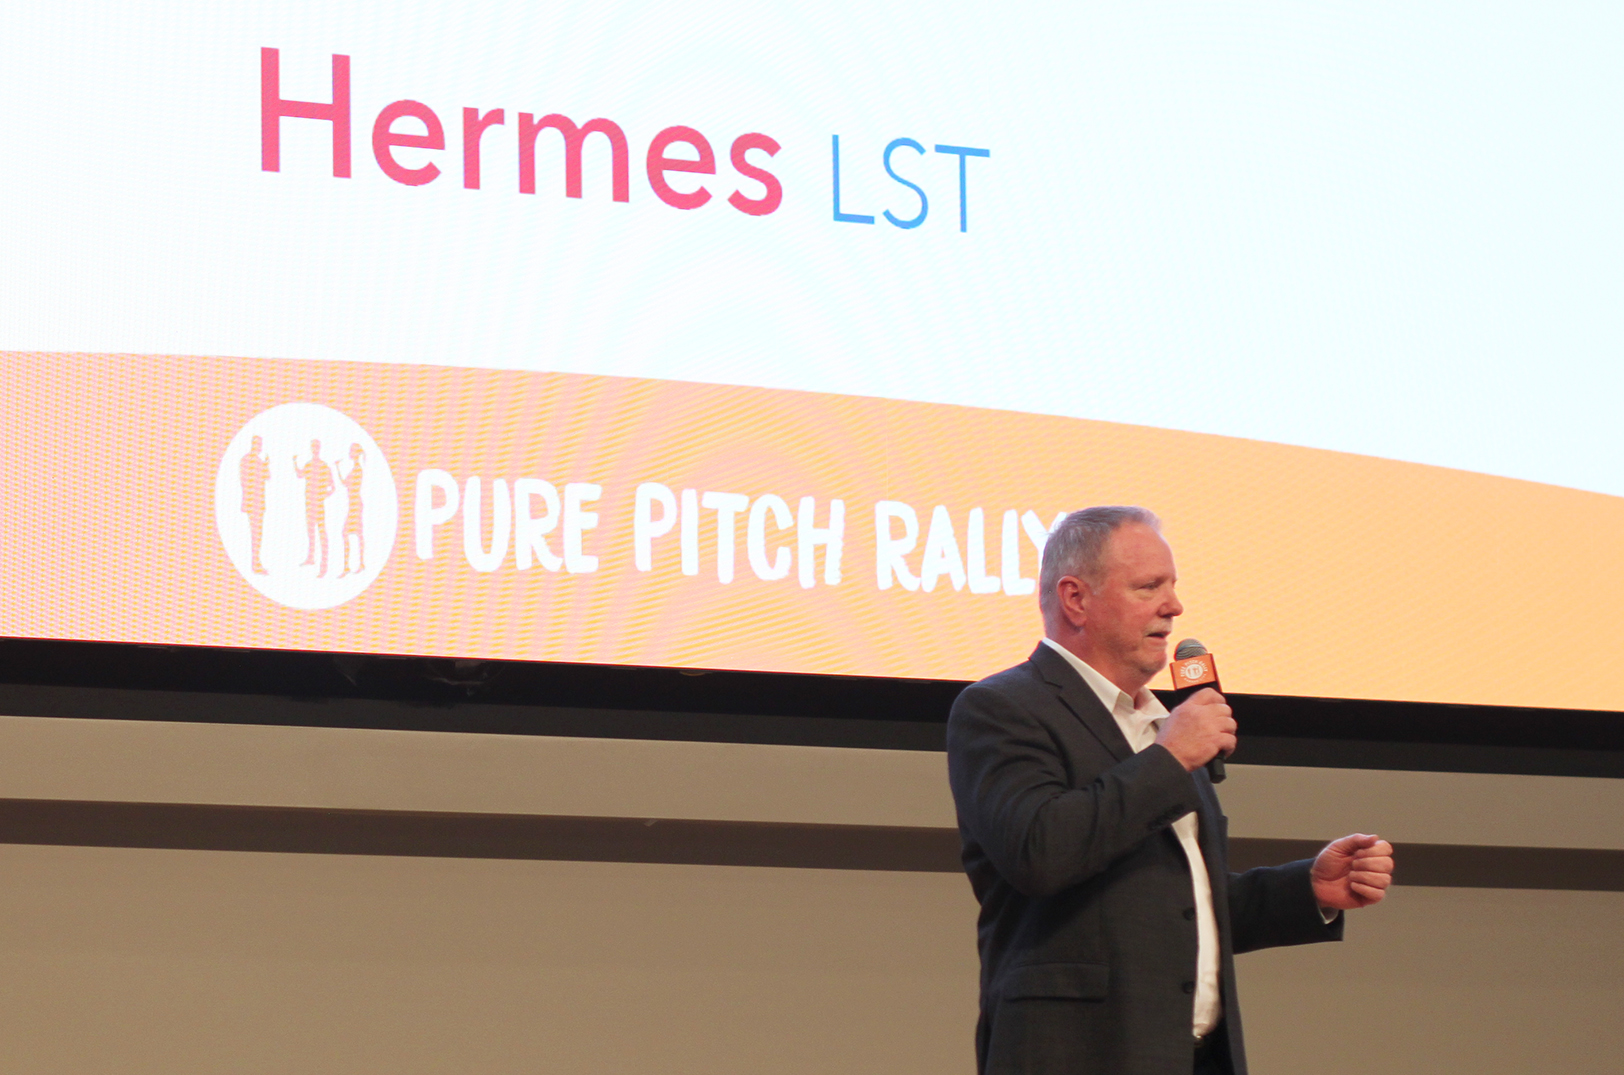 Pure Pitch Rally Rick Macartney Hermes LST 02